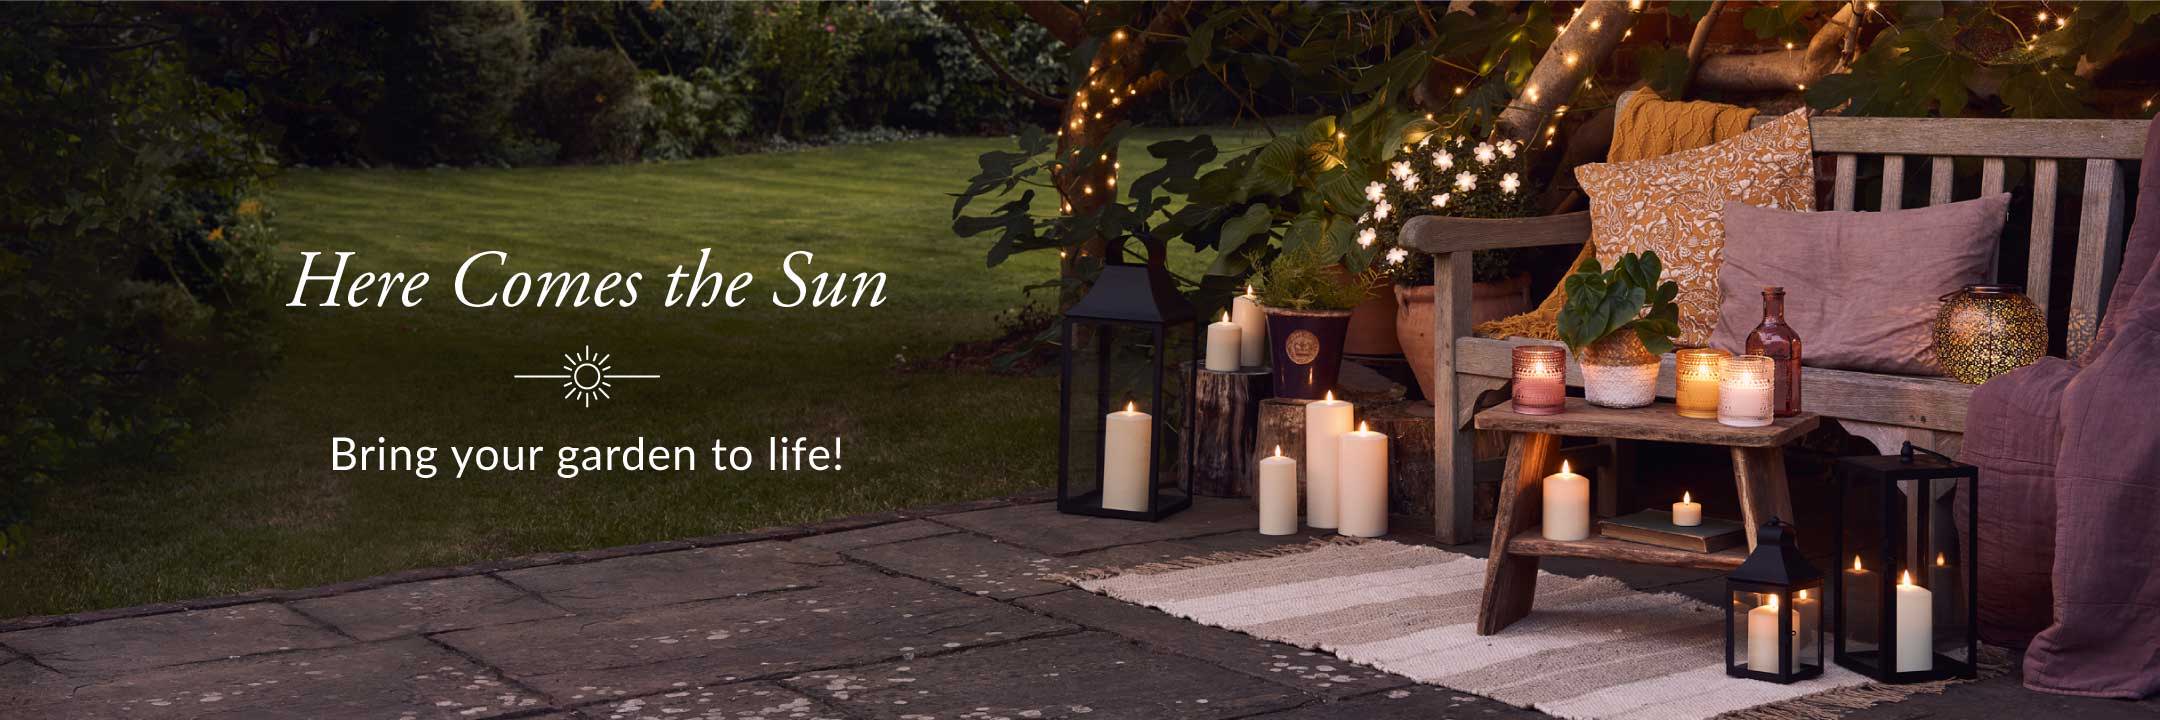 Here Comes the Sun - Bring your garden to life!